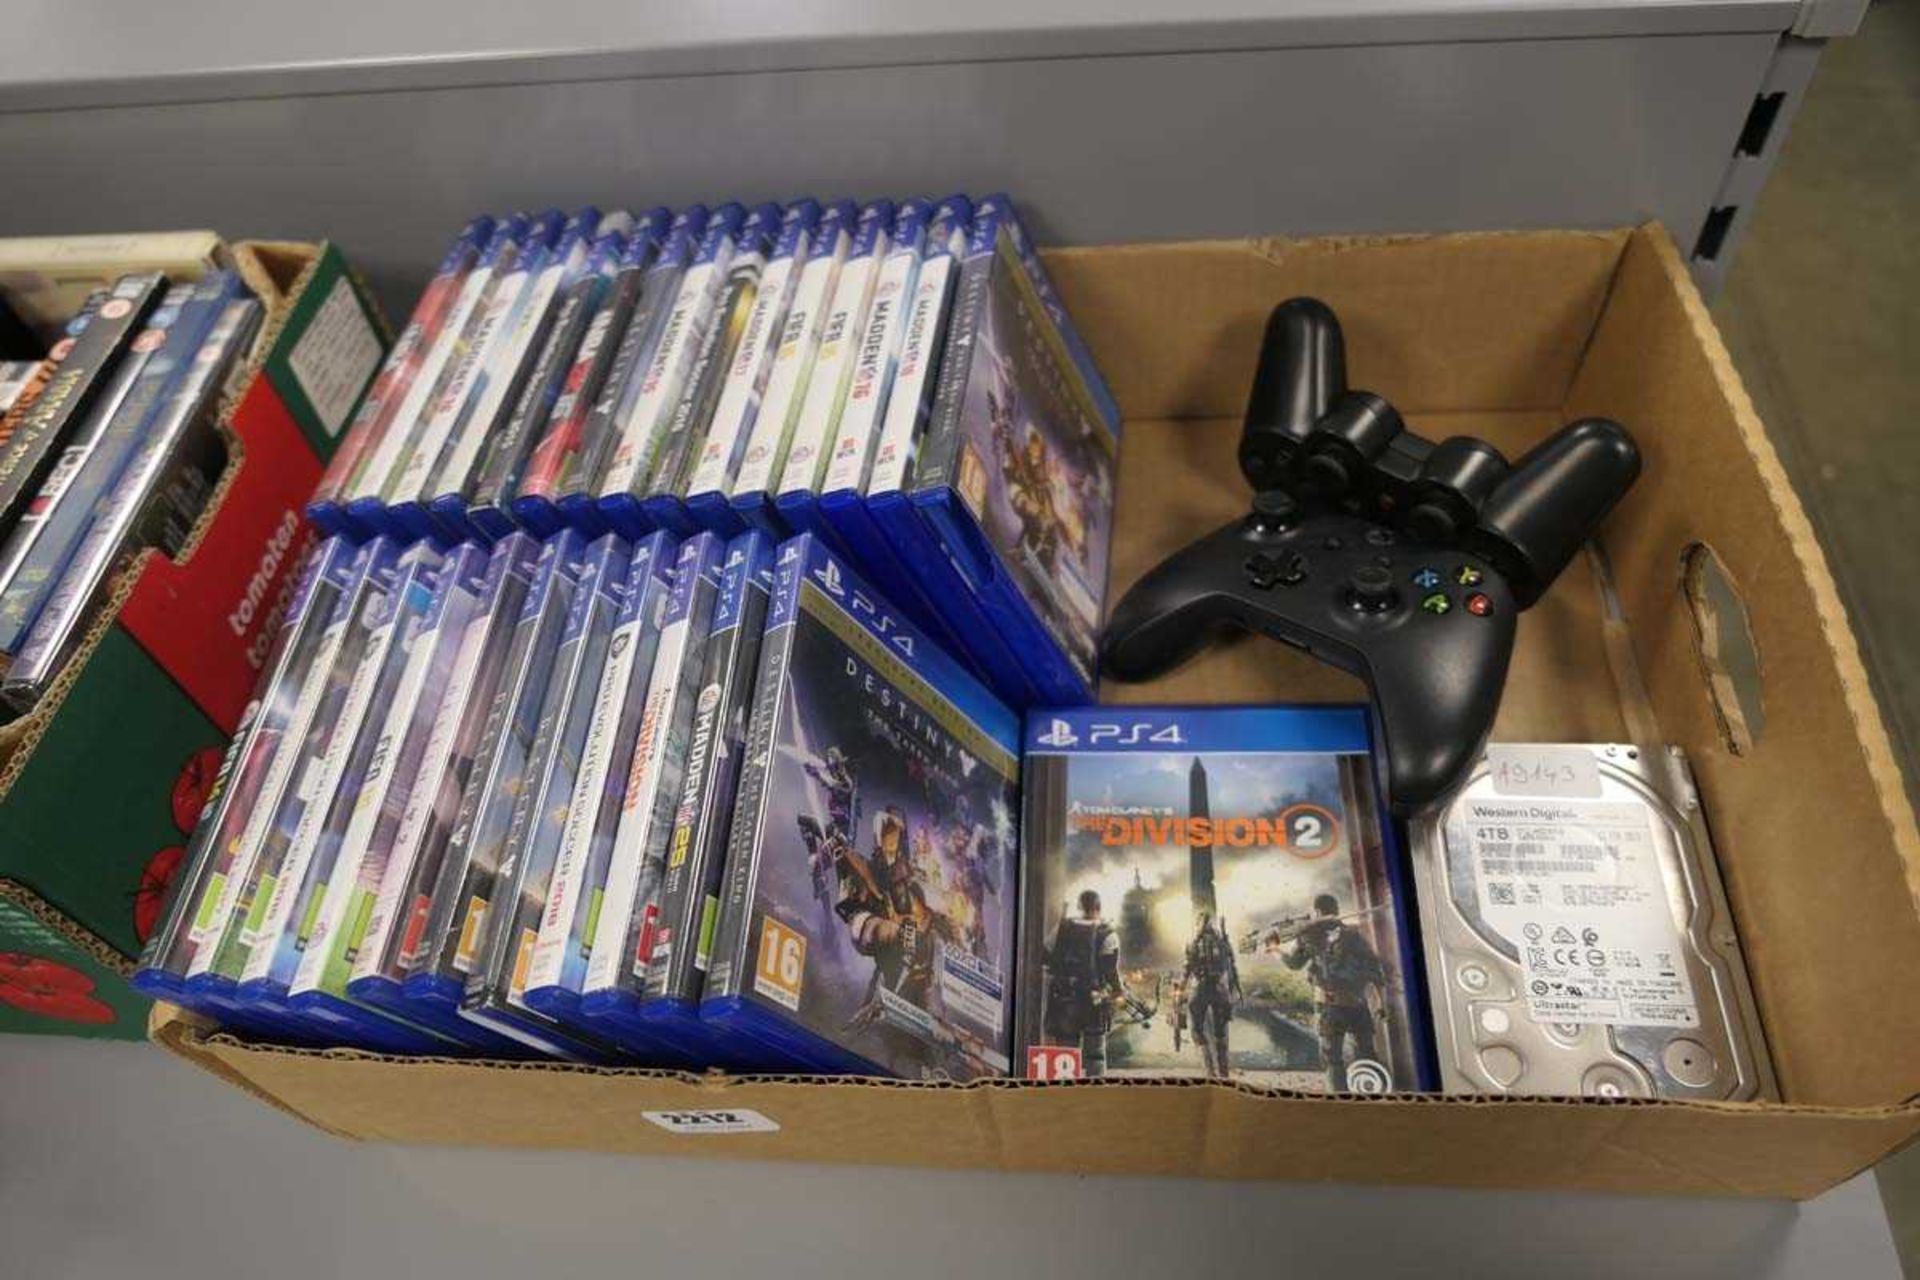 Box containing PS4 games, Western Digital 4TB hard drive, and 2 controllers (Xbox and PS)